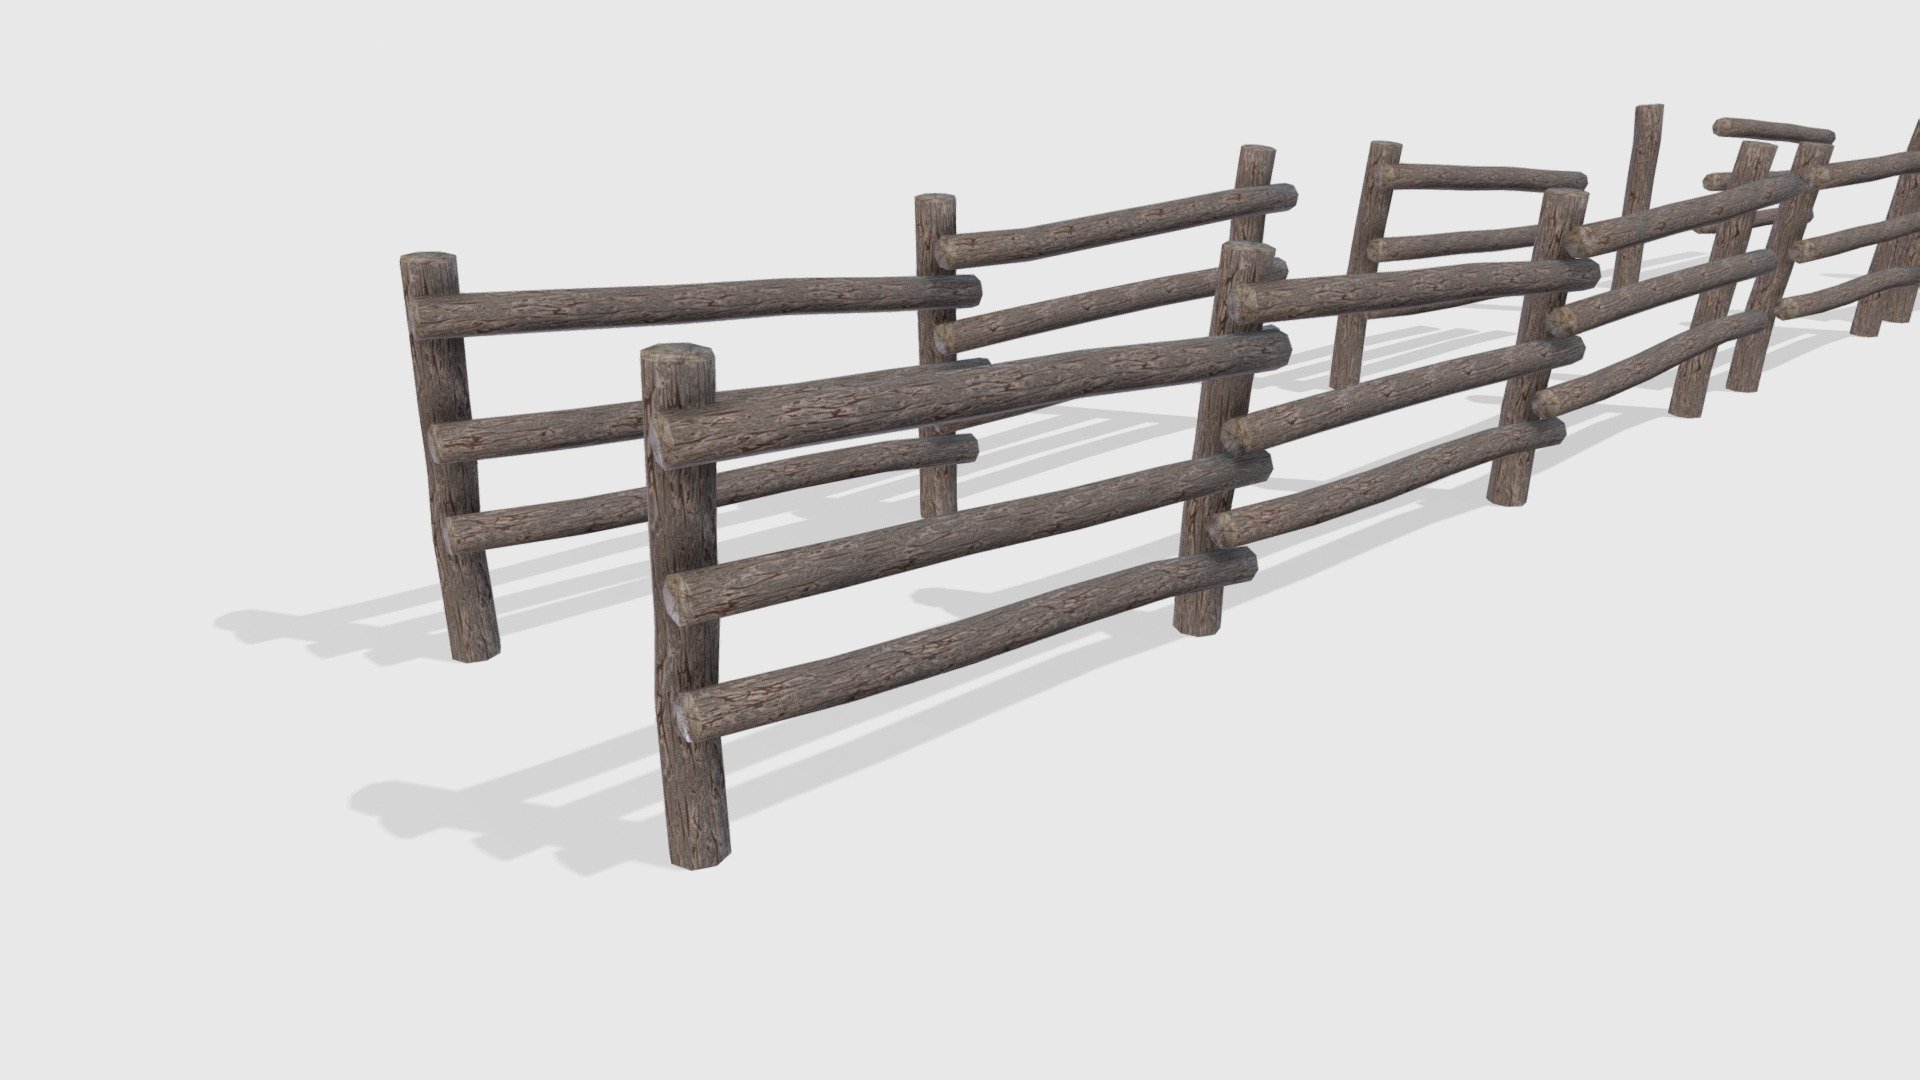 This is a pack of low-poly fence assets.
The fences are made out of old barkless logs.
It includes:


1 Fence
2 Fences
3 Fences
Broken fence
Fence without one pole
Pole
Horizontal logs of the fence

2048x2048 maps: color, normal and roughness.
Formats: .fbx, .obj, .blend.
There is an individual .obj for each asset in the additional file 3d model